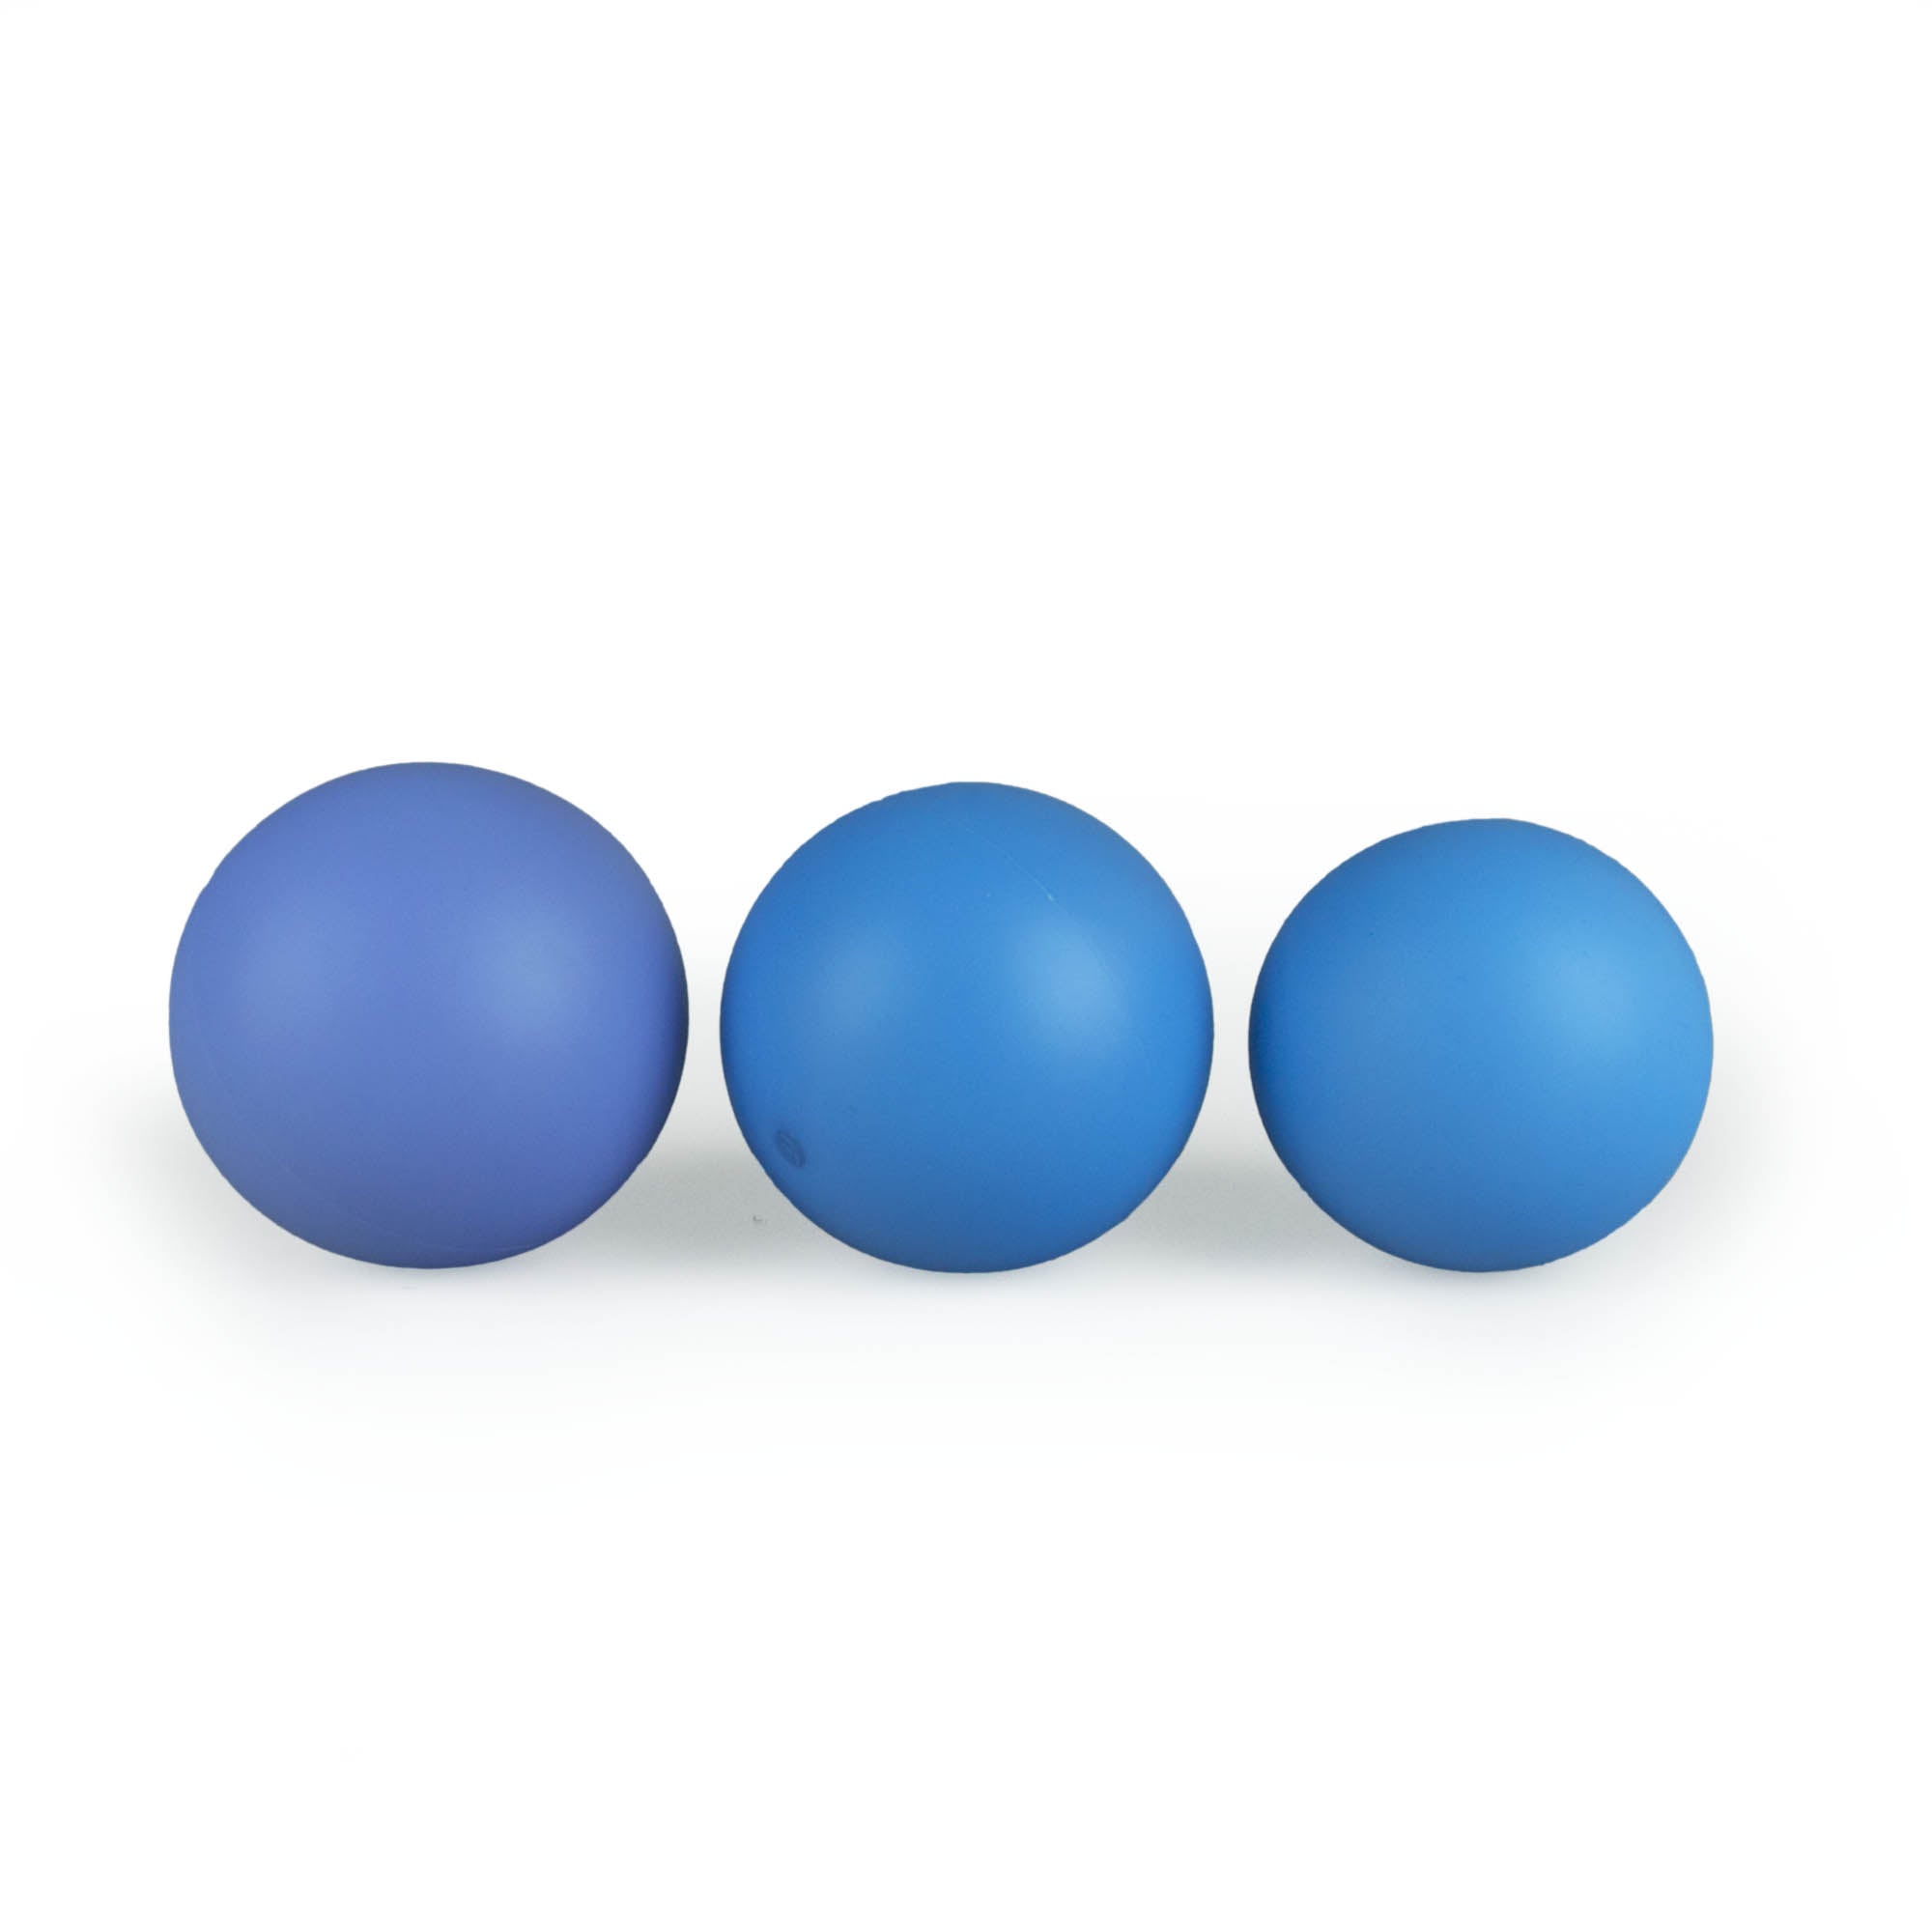 MMX juggling ball comparison in blue